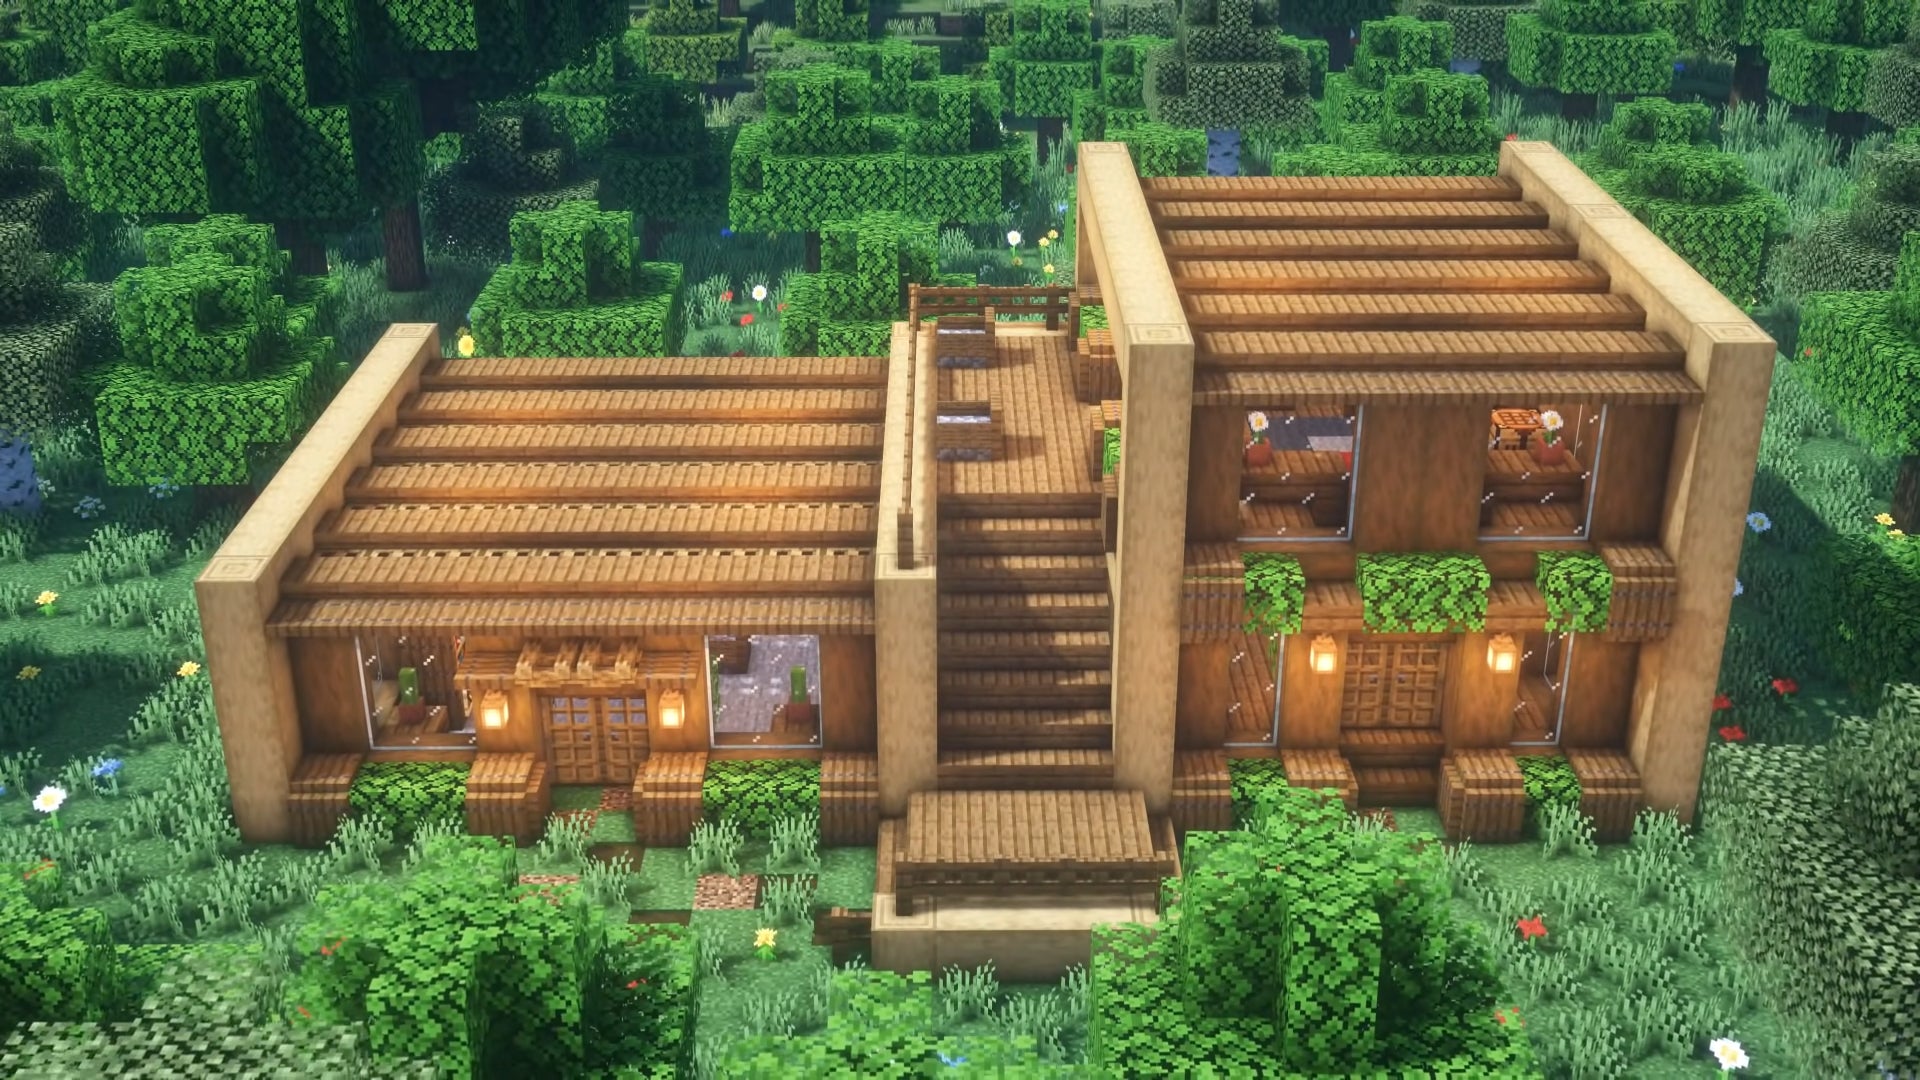 A wooden survival house in Minecraft, built by YouTuber Folli.